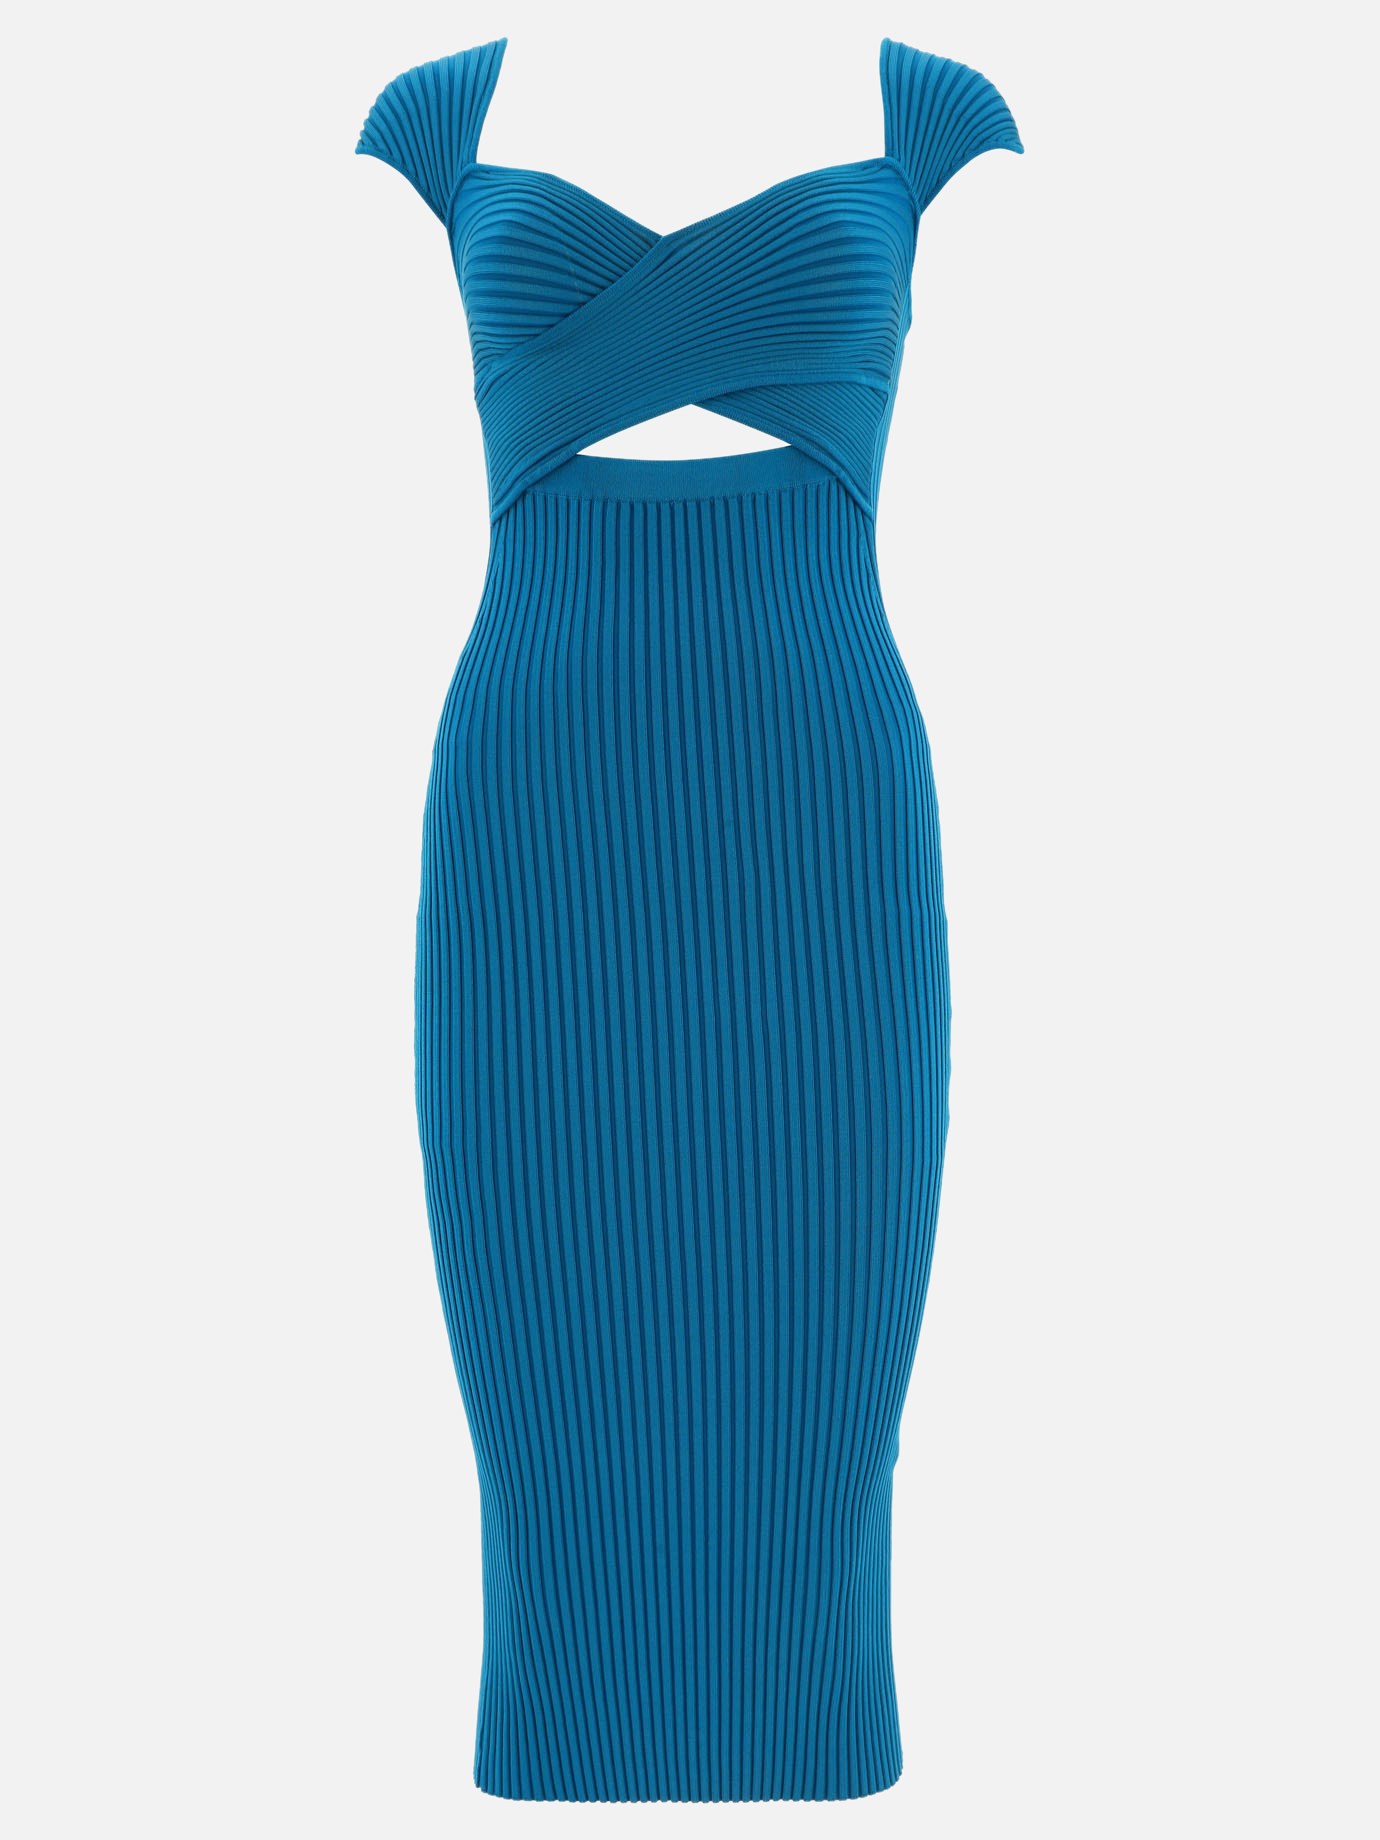 Ribbed dress with cut-outby Self-portrait - 2